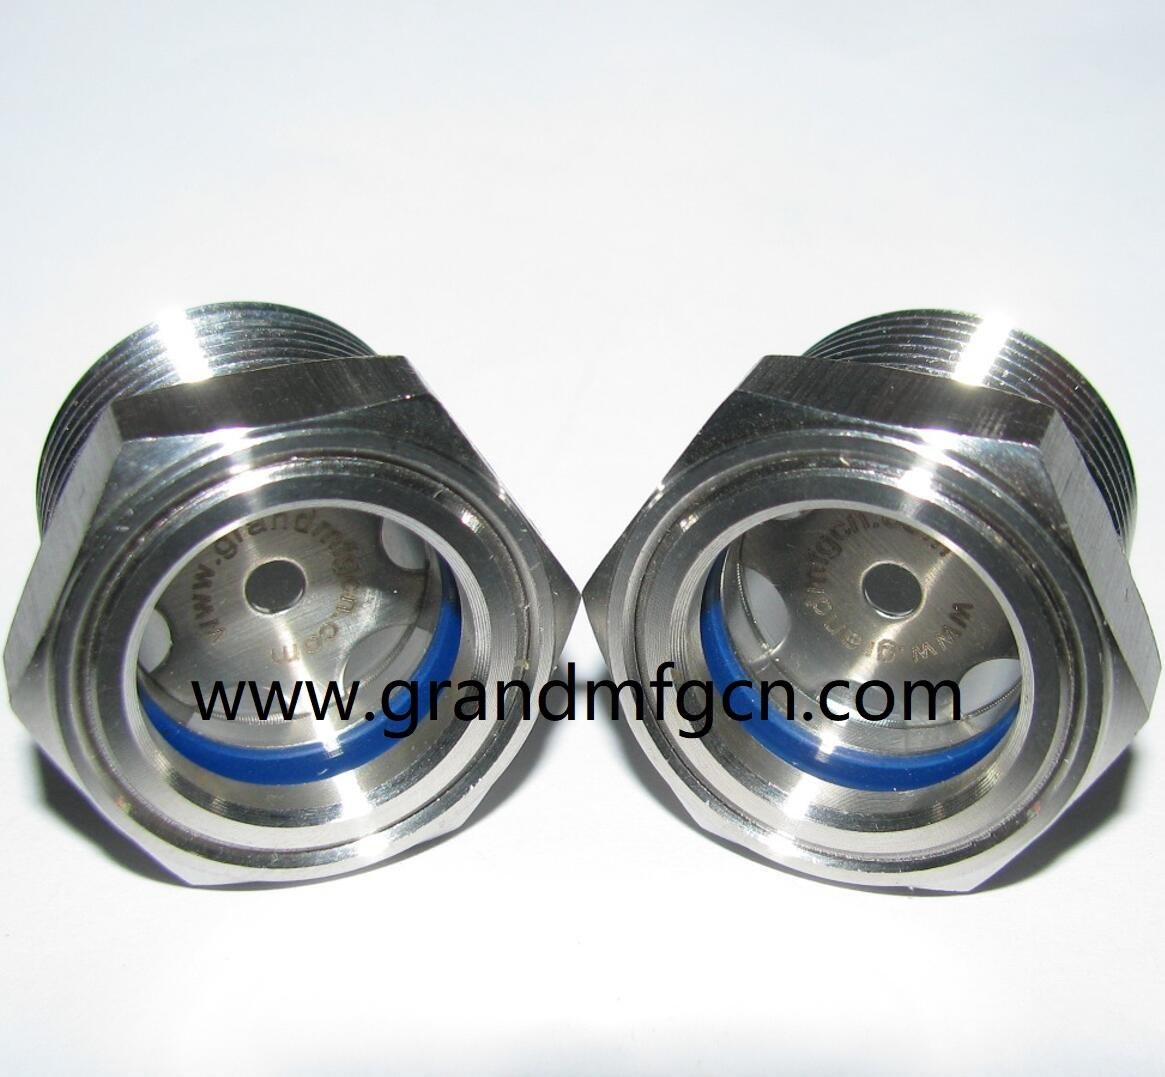 STAINLESS STEEL 1/2 OIL SIGHT GLASS